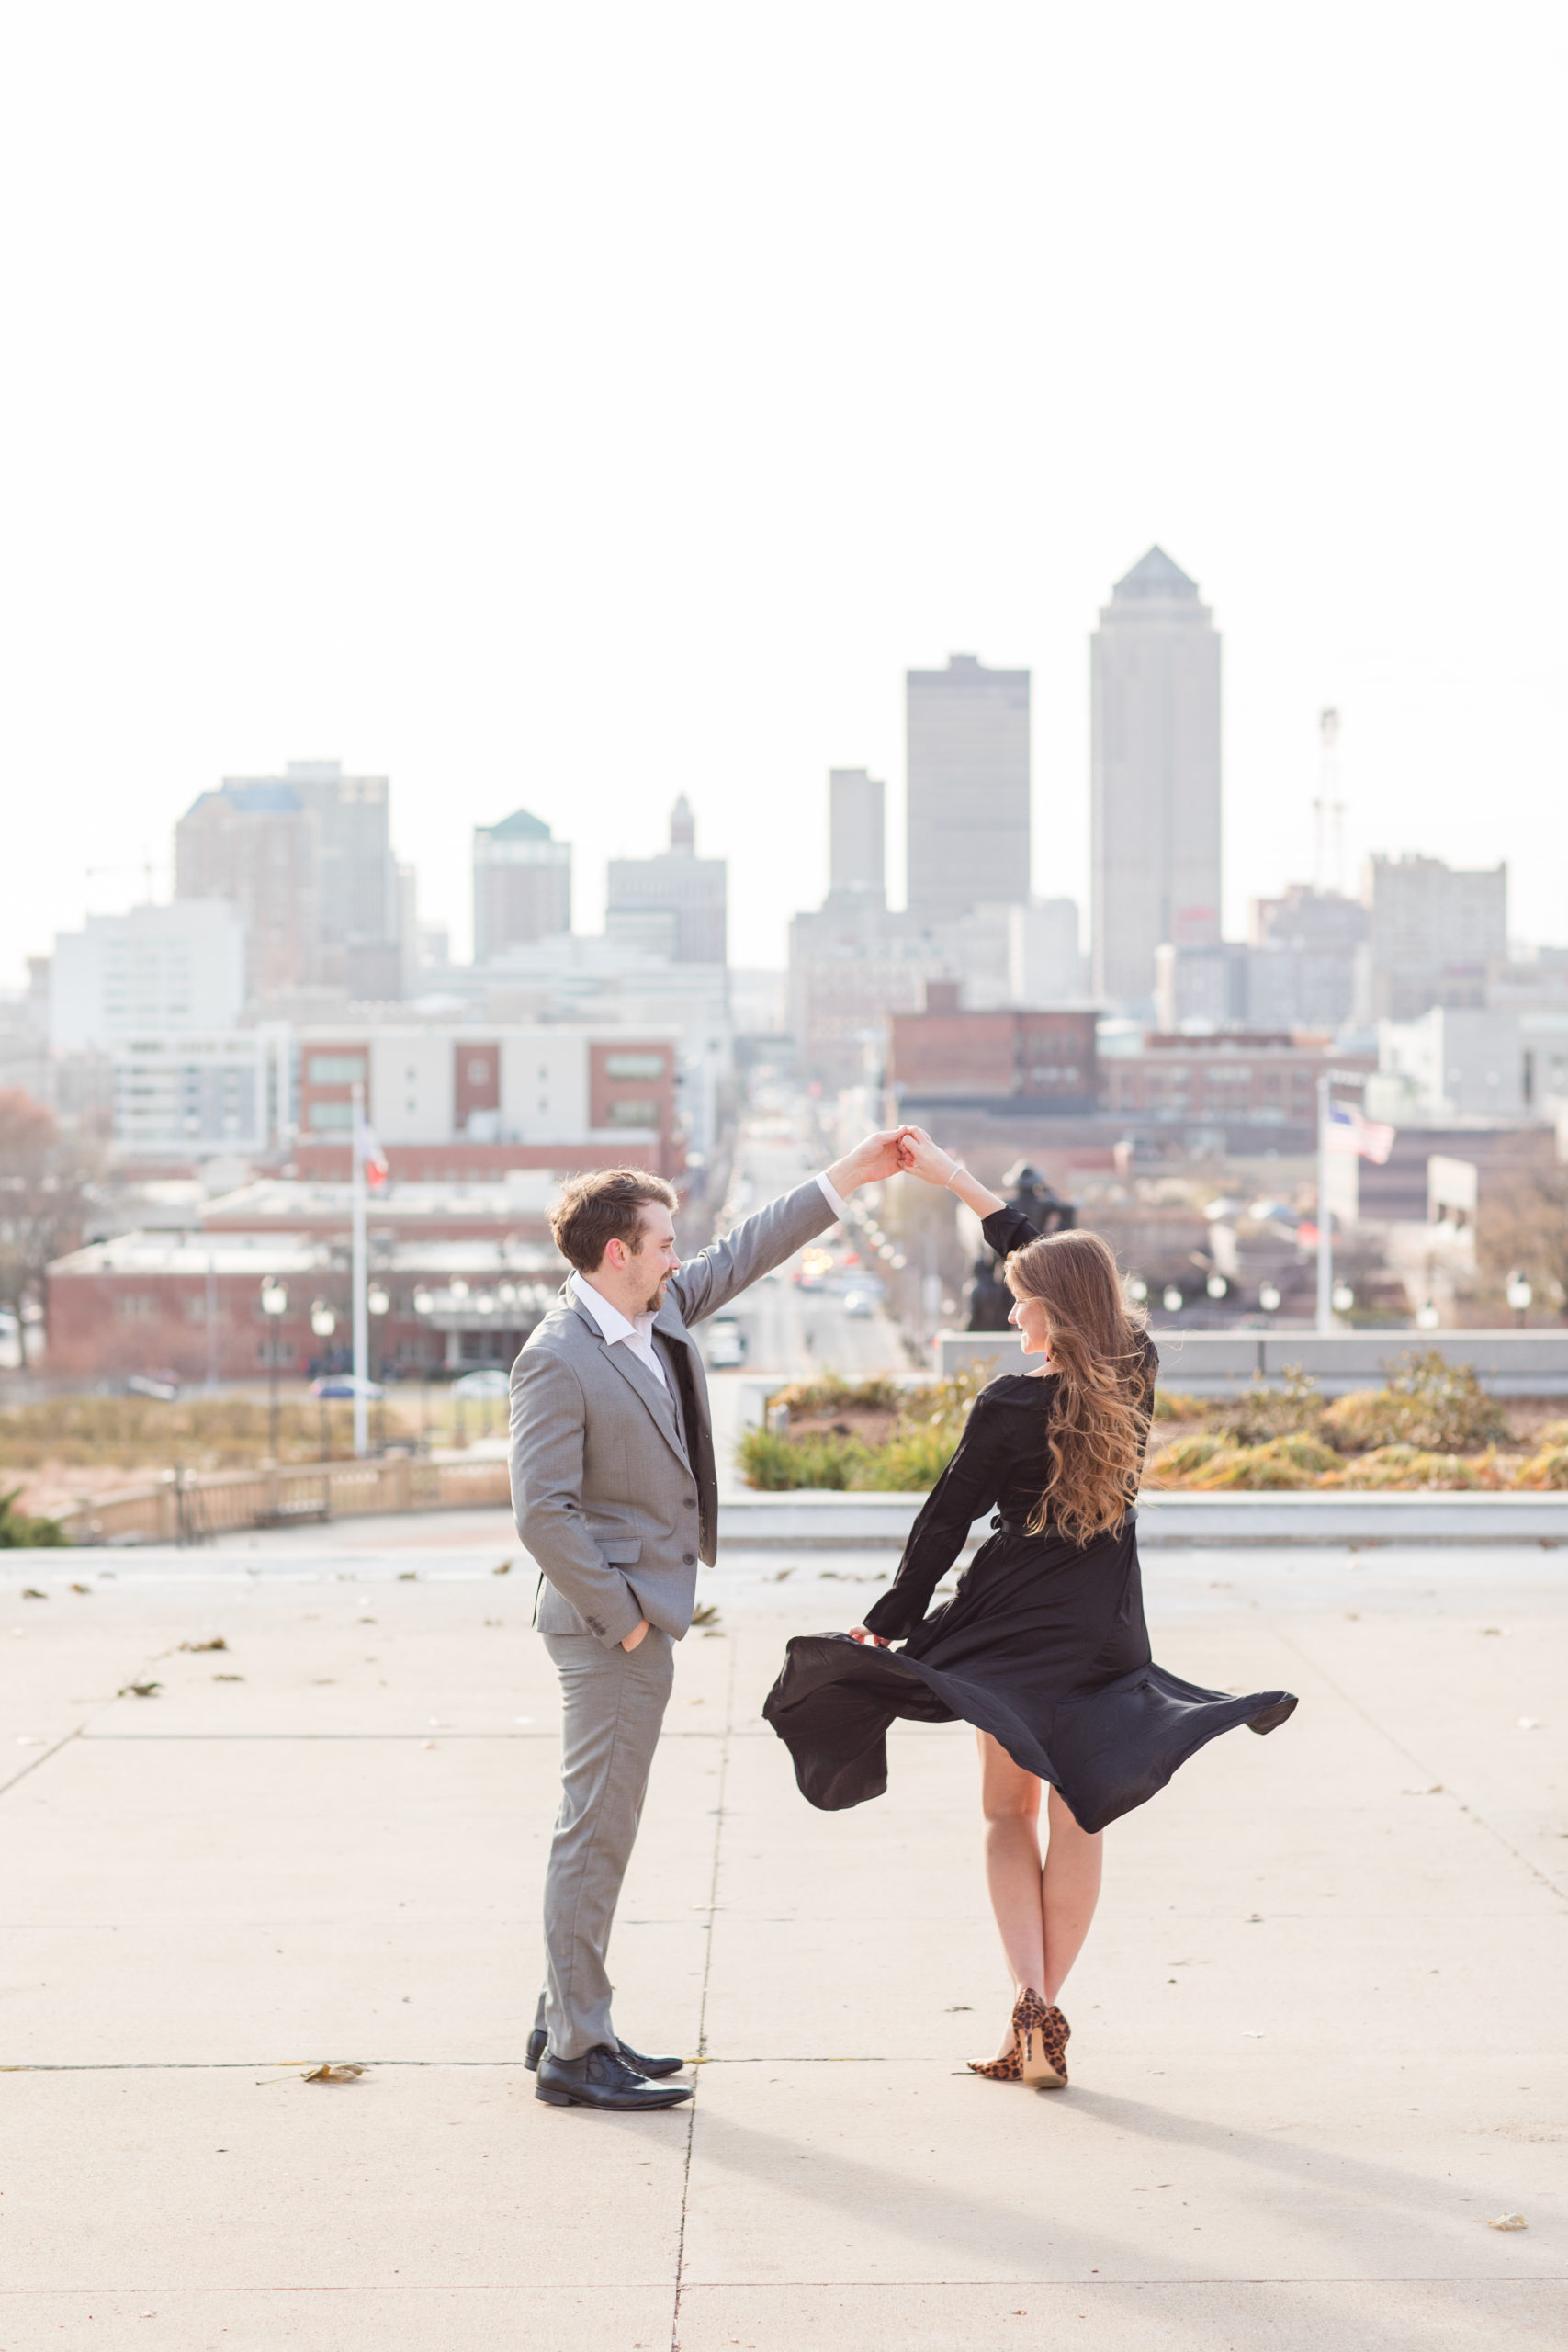 State Capital Engagement Des Moines Iowa shot by Jessica Brees Photography & Videography